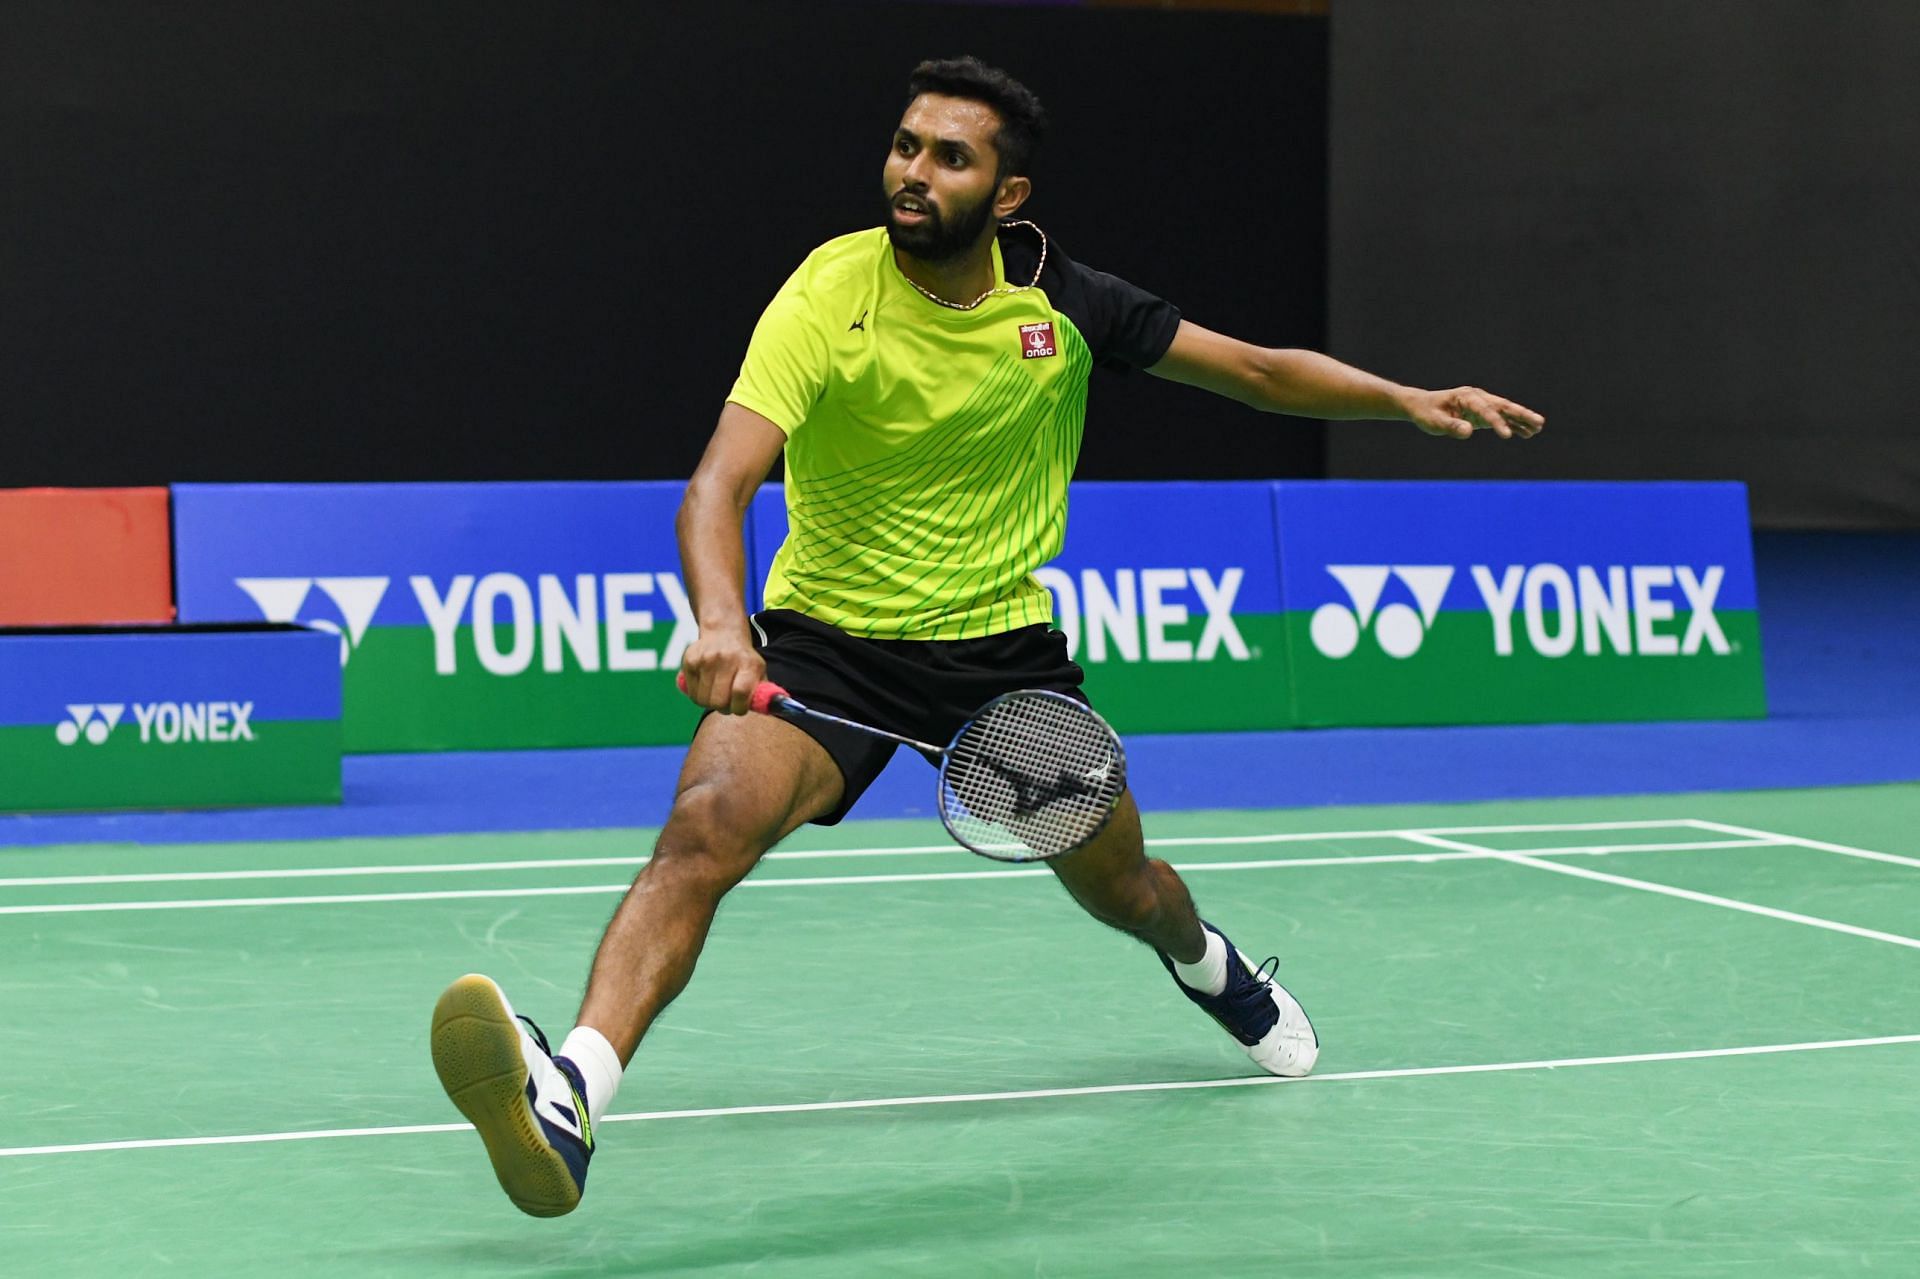 HS Prannoy beat Lee Cheuk Yiu of Hong Kong China 21-19, 24-22 in the German Open men&#039;s singles second round match on Thursday. (Pic credit: BAI)